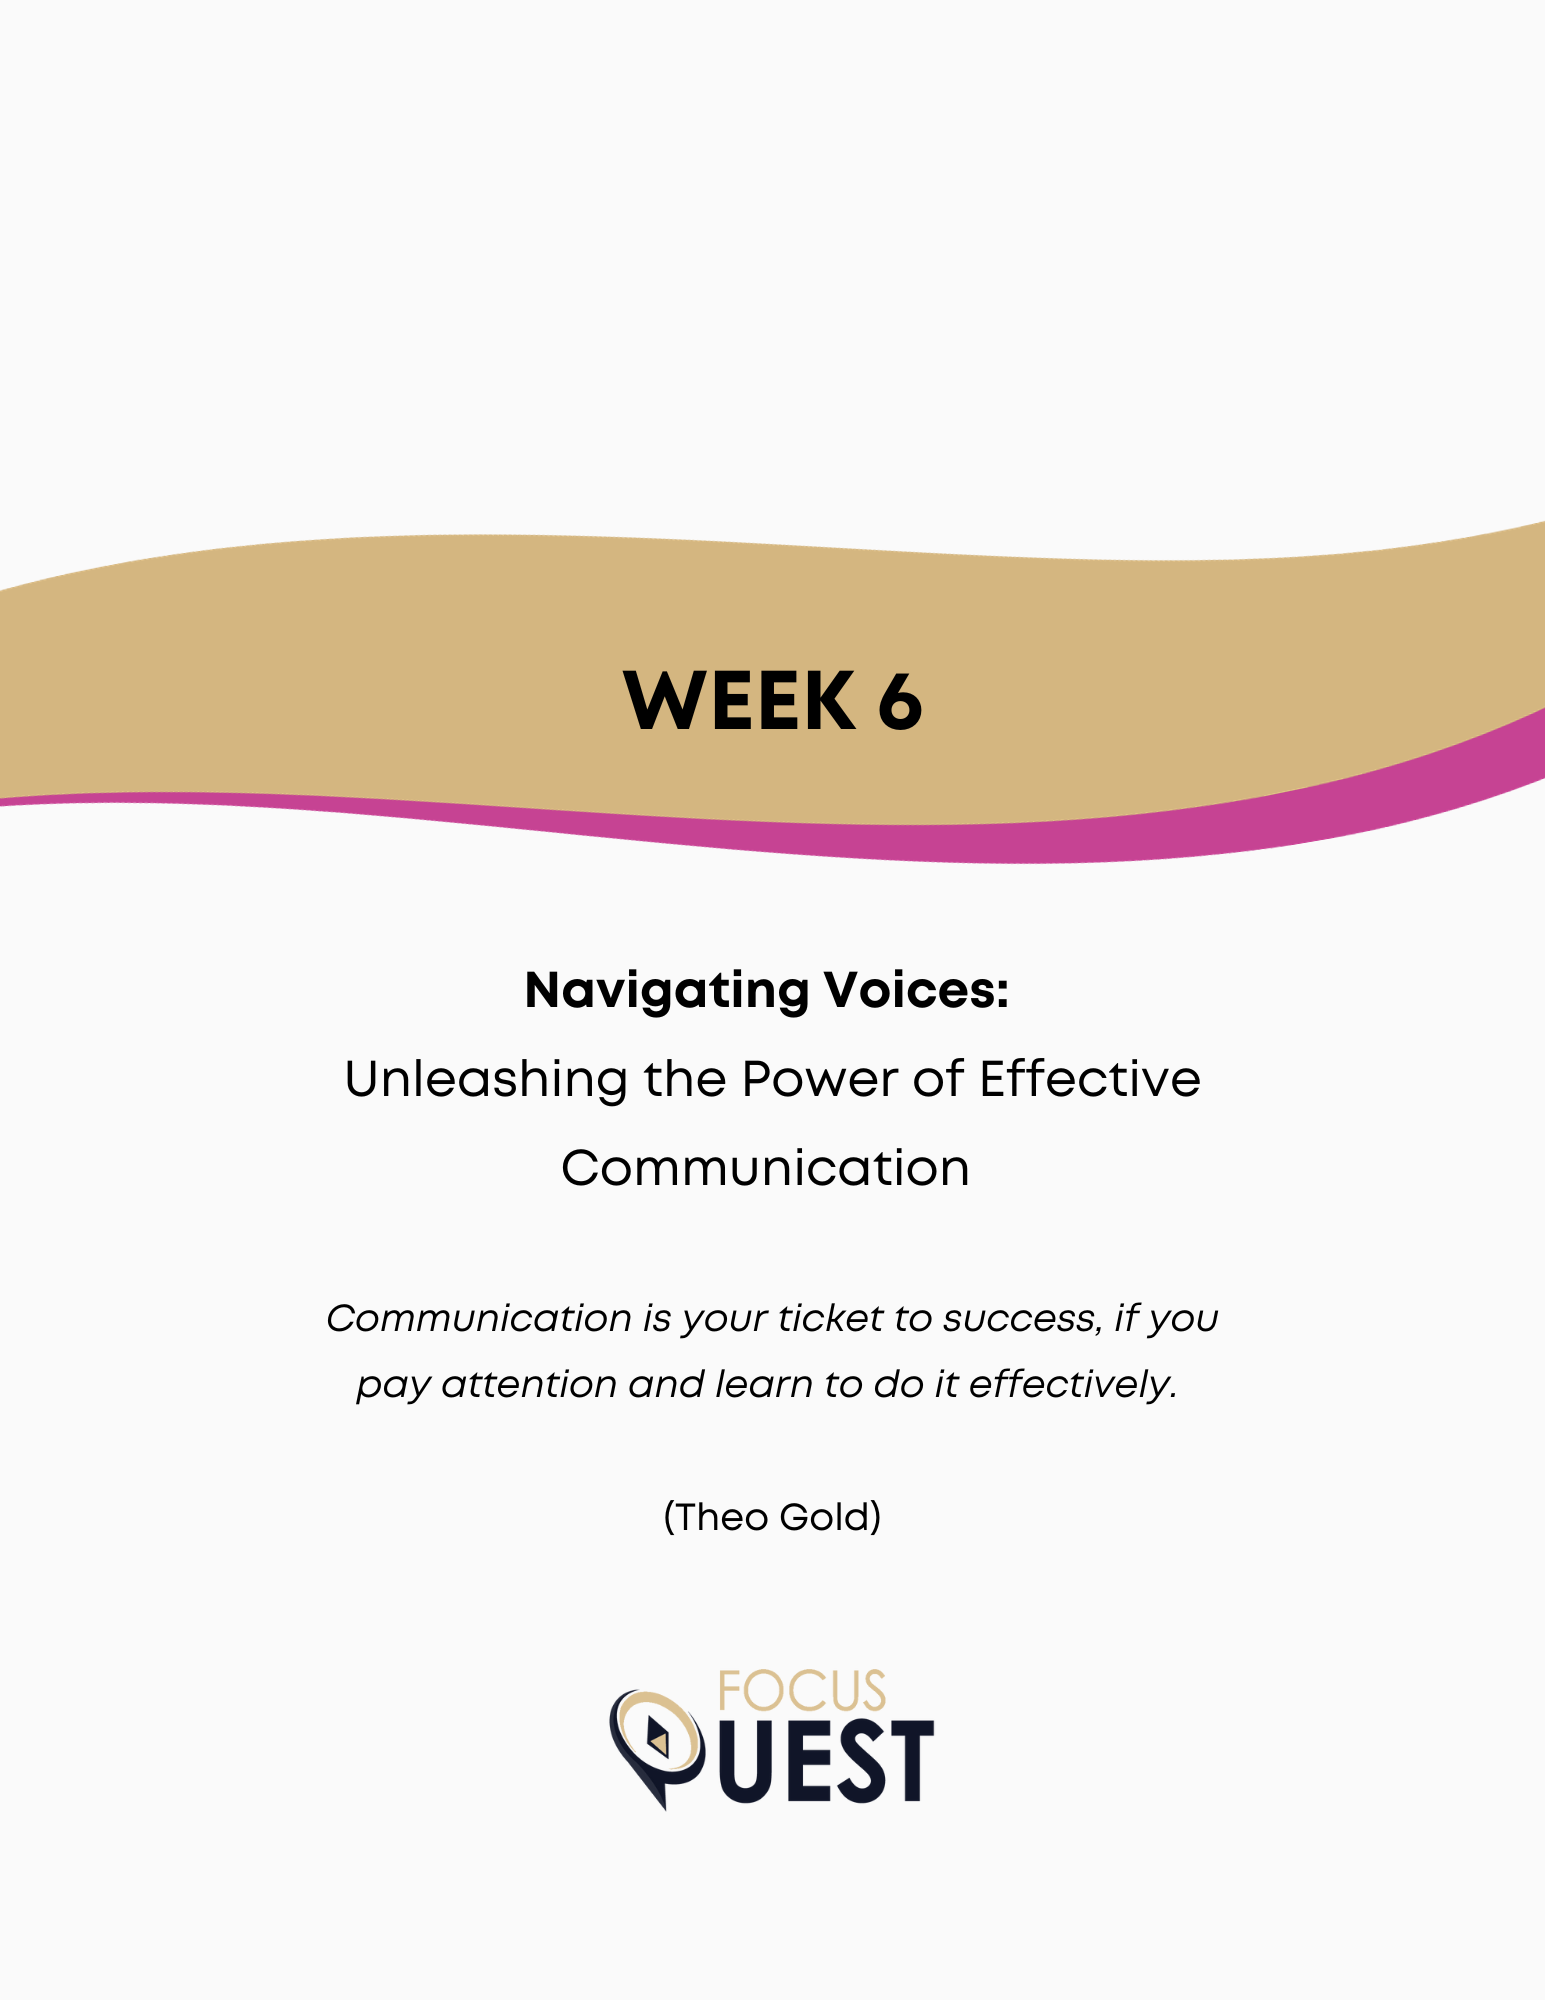 FocusQuest - Quest for Success - Week 6 - Navigating Voices: Unleashing the Power of Effective Communication